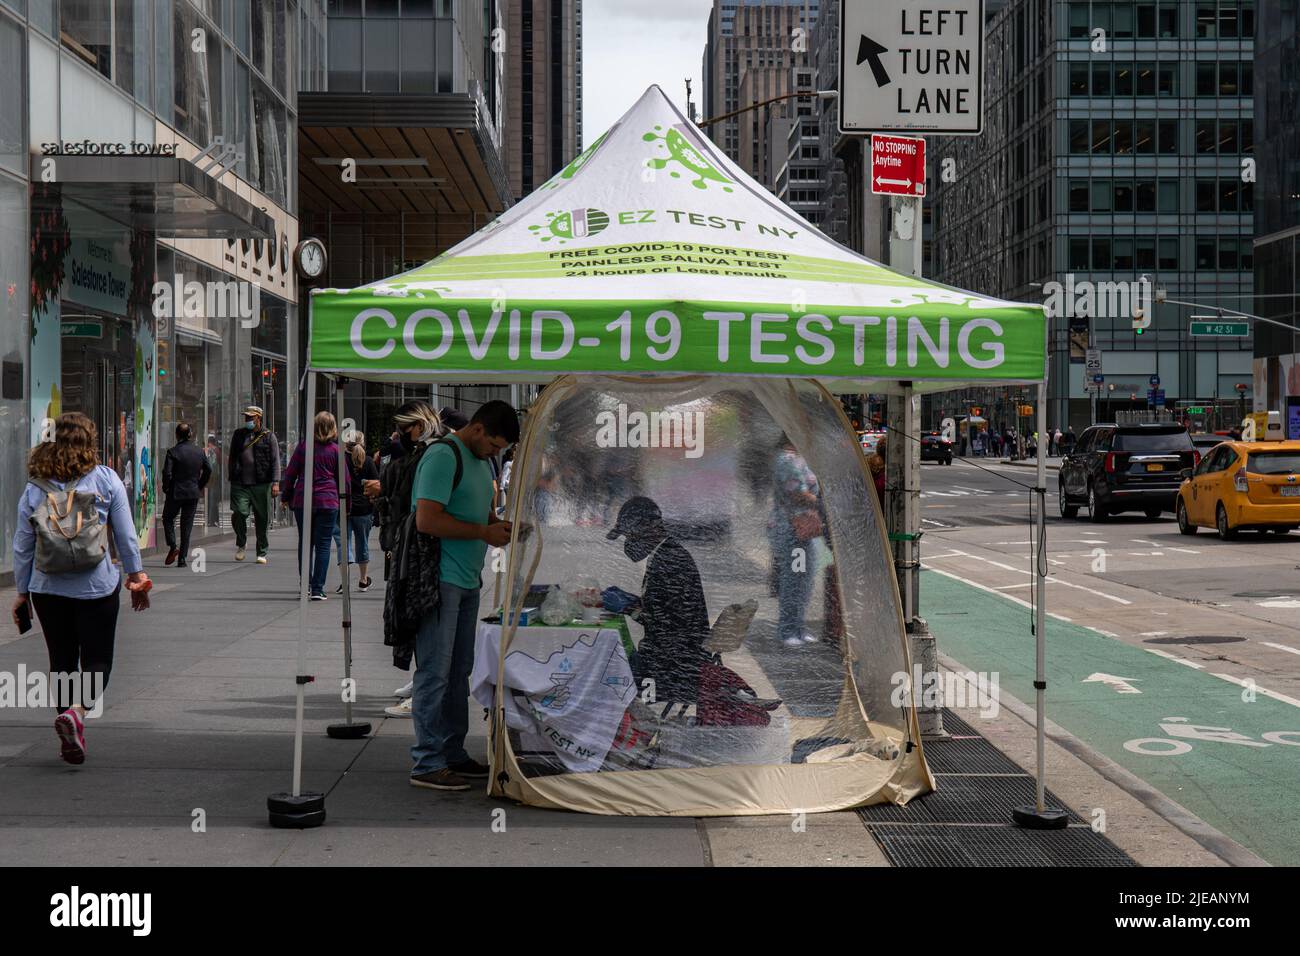 EZ Test NY Covid-19 mobile testing unit in Midtown Manhattan, New York City, United States of America Stock Photo